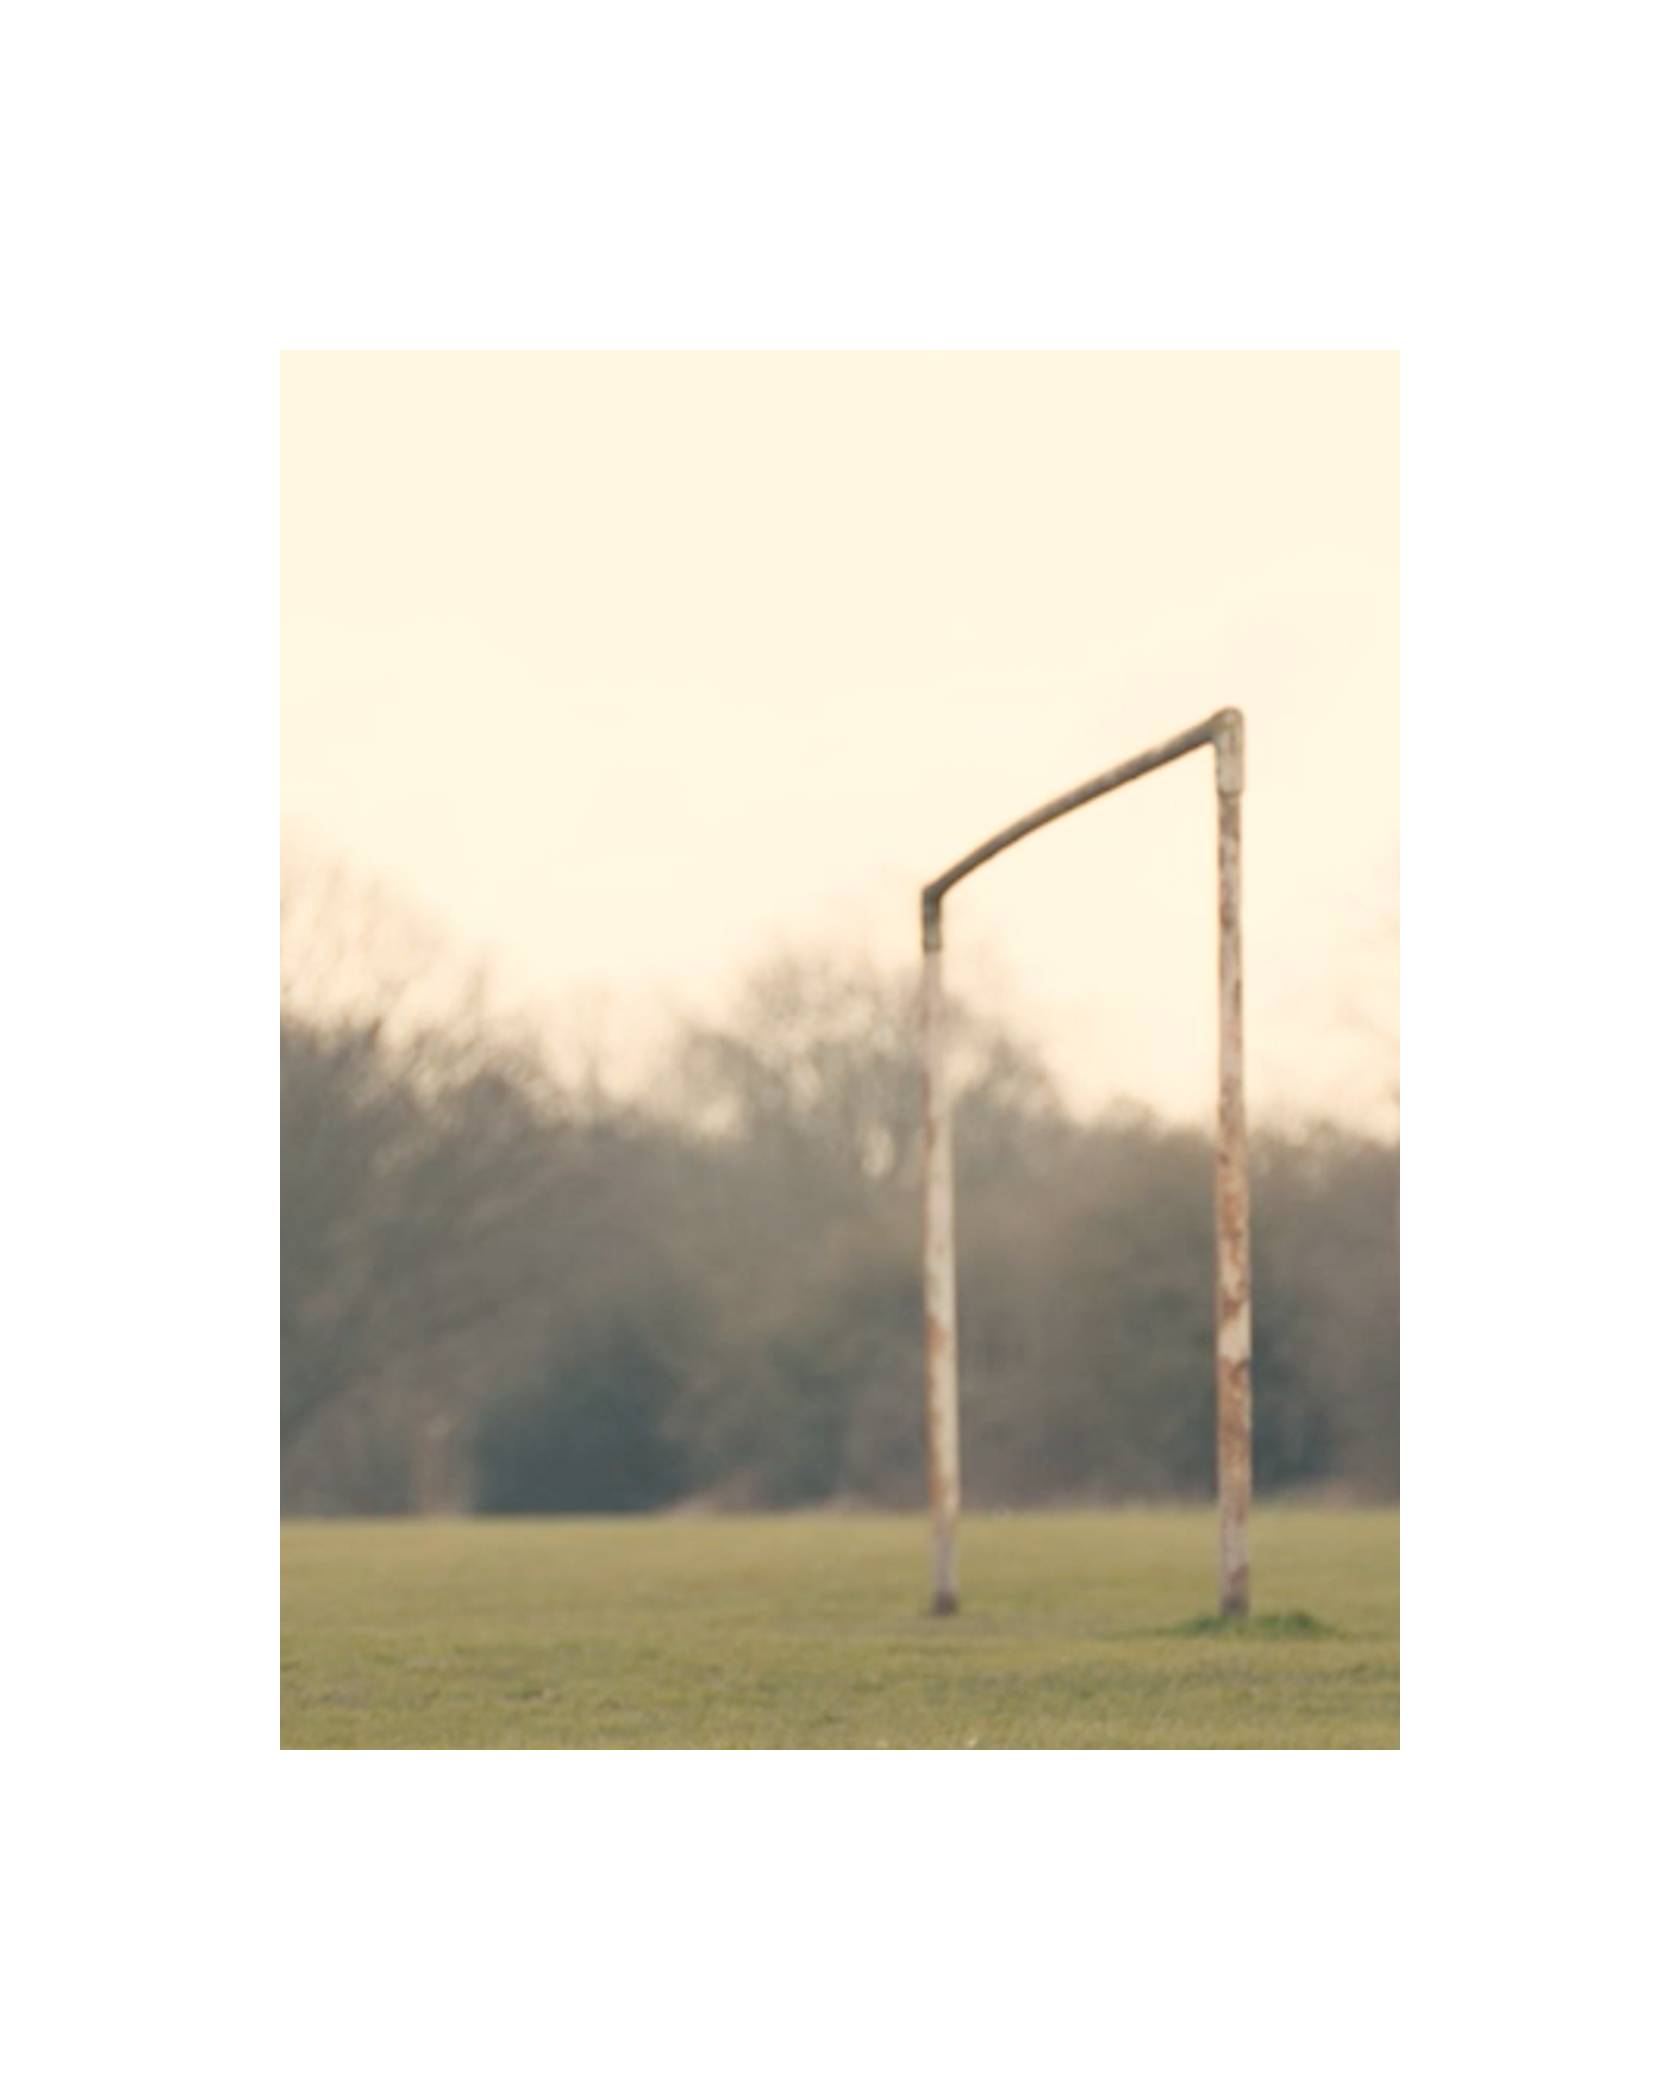 A photo of a soccer goal with no net